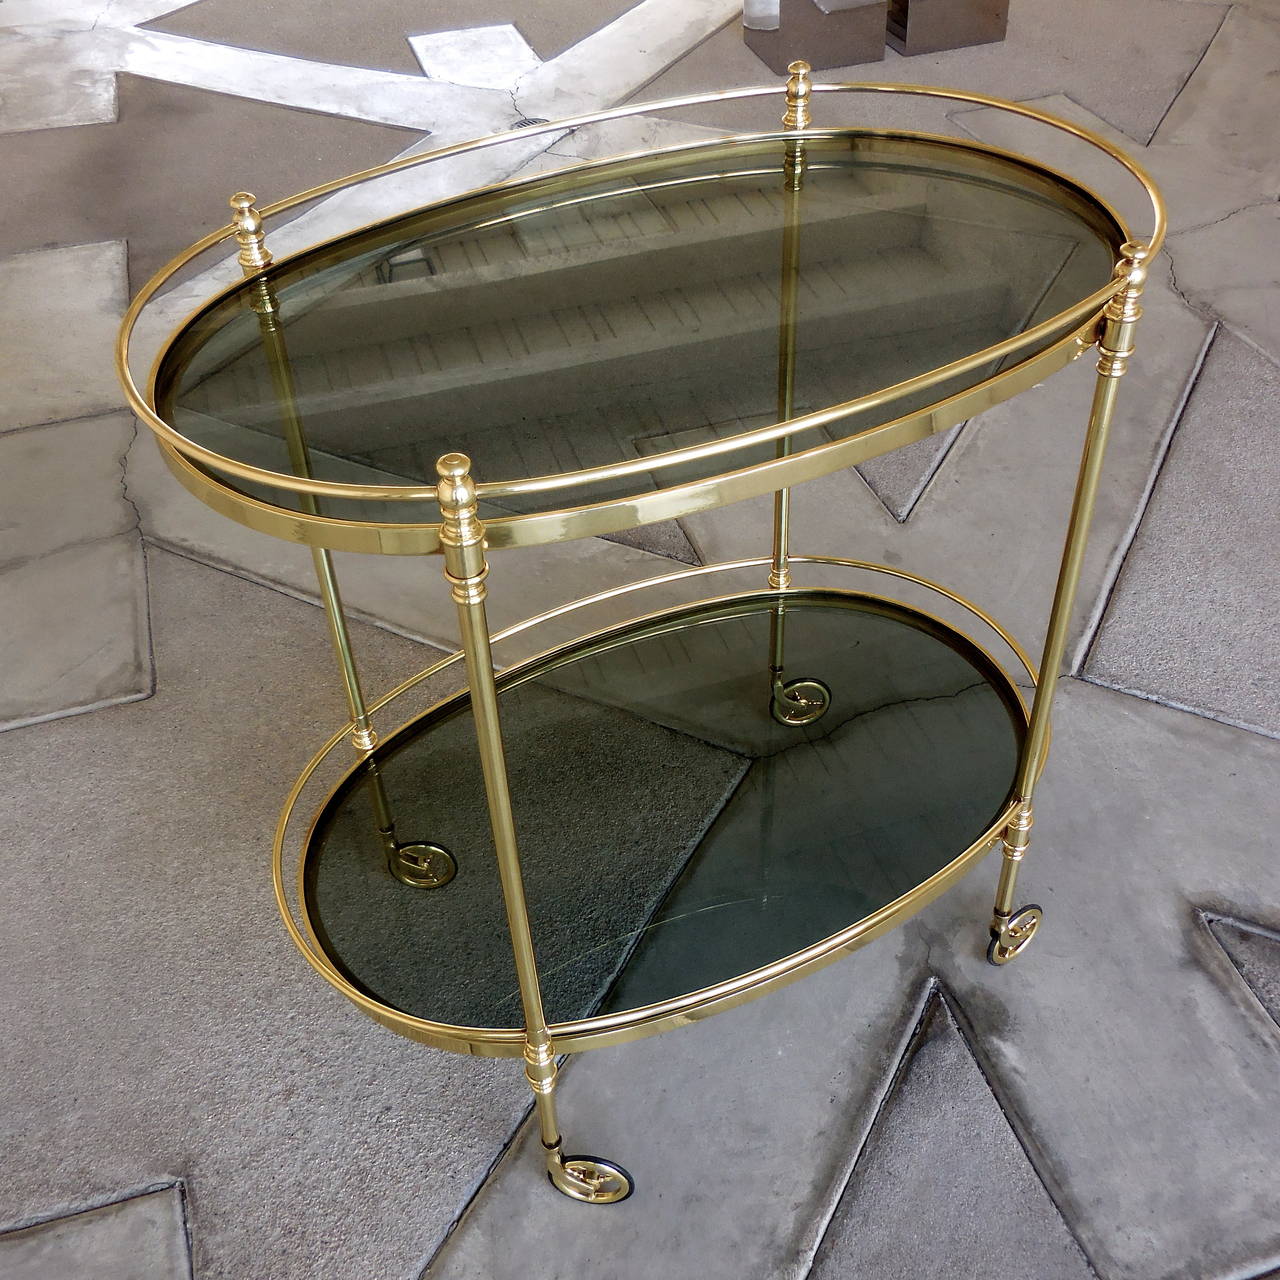 A fine quality solid brass two-tier oval serving cart with smoked glass shelves made in the 1950s. The cart does not bear any maker's marks but is similar in form to pieces made in Italy during this period, specifically in the wheel design.
The